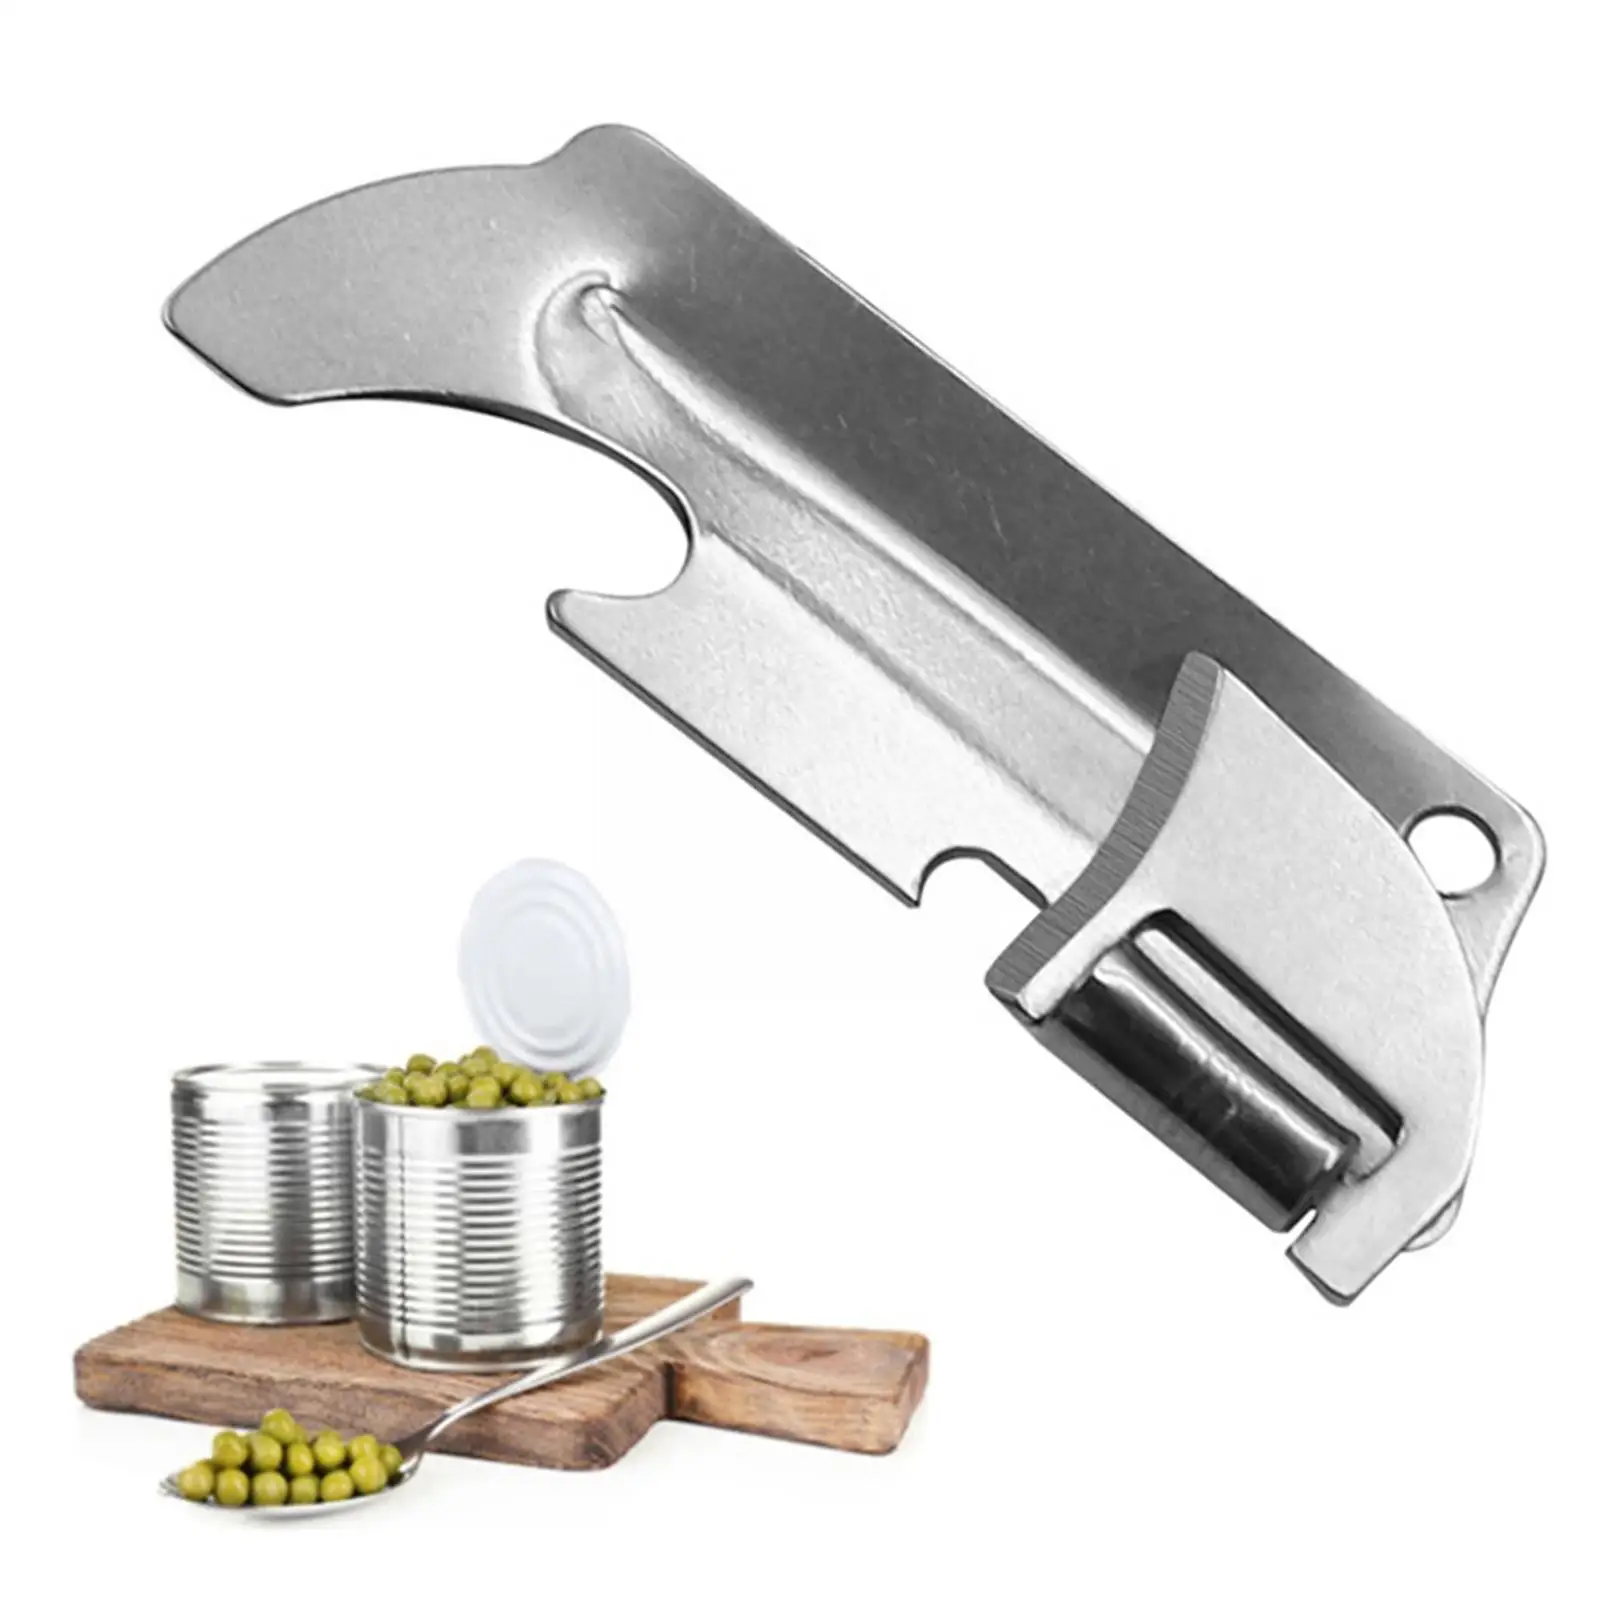 

Polished Stainless Steel Finishwith The Utili-key Stainless Can Folding Opener Tool Opener Steel Opener Multi-function Mini K9I4